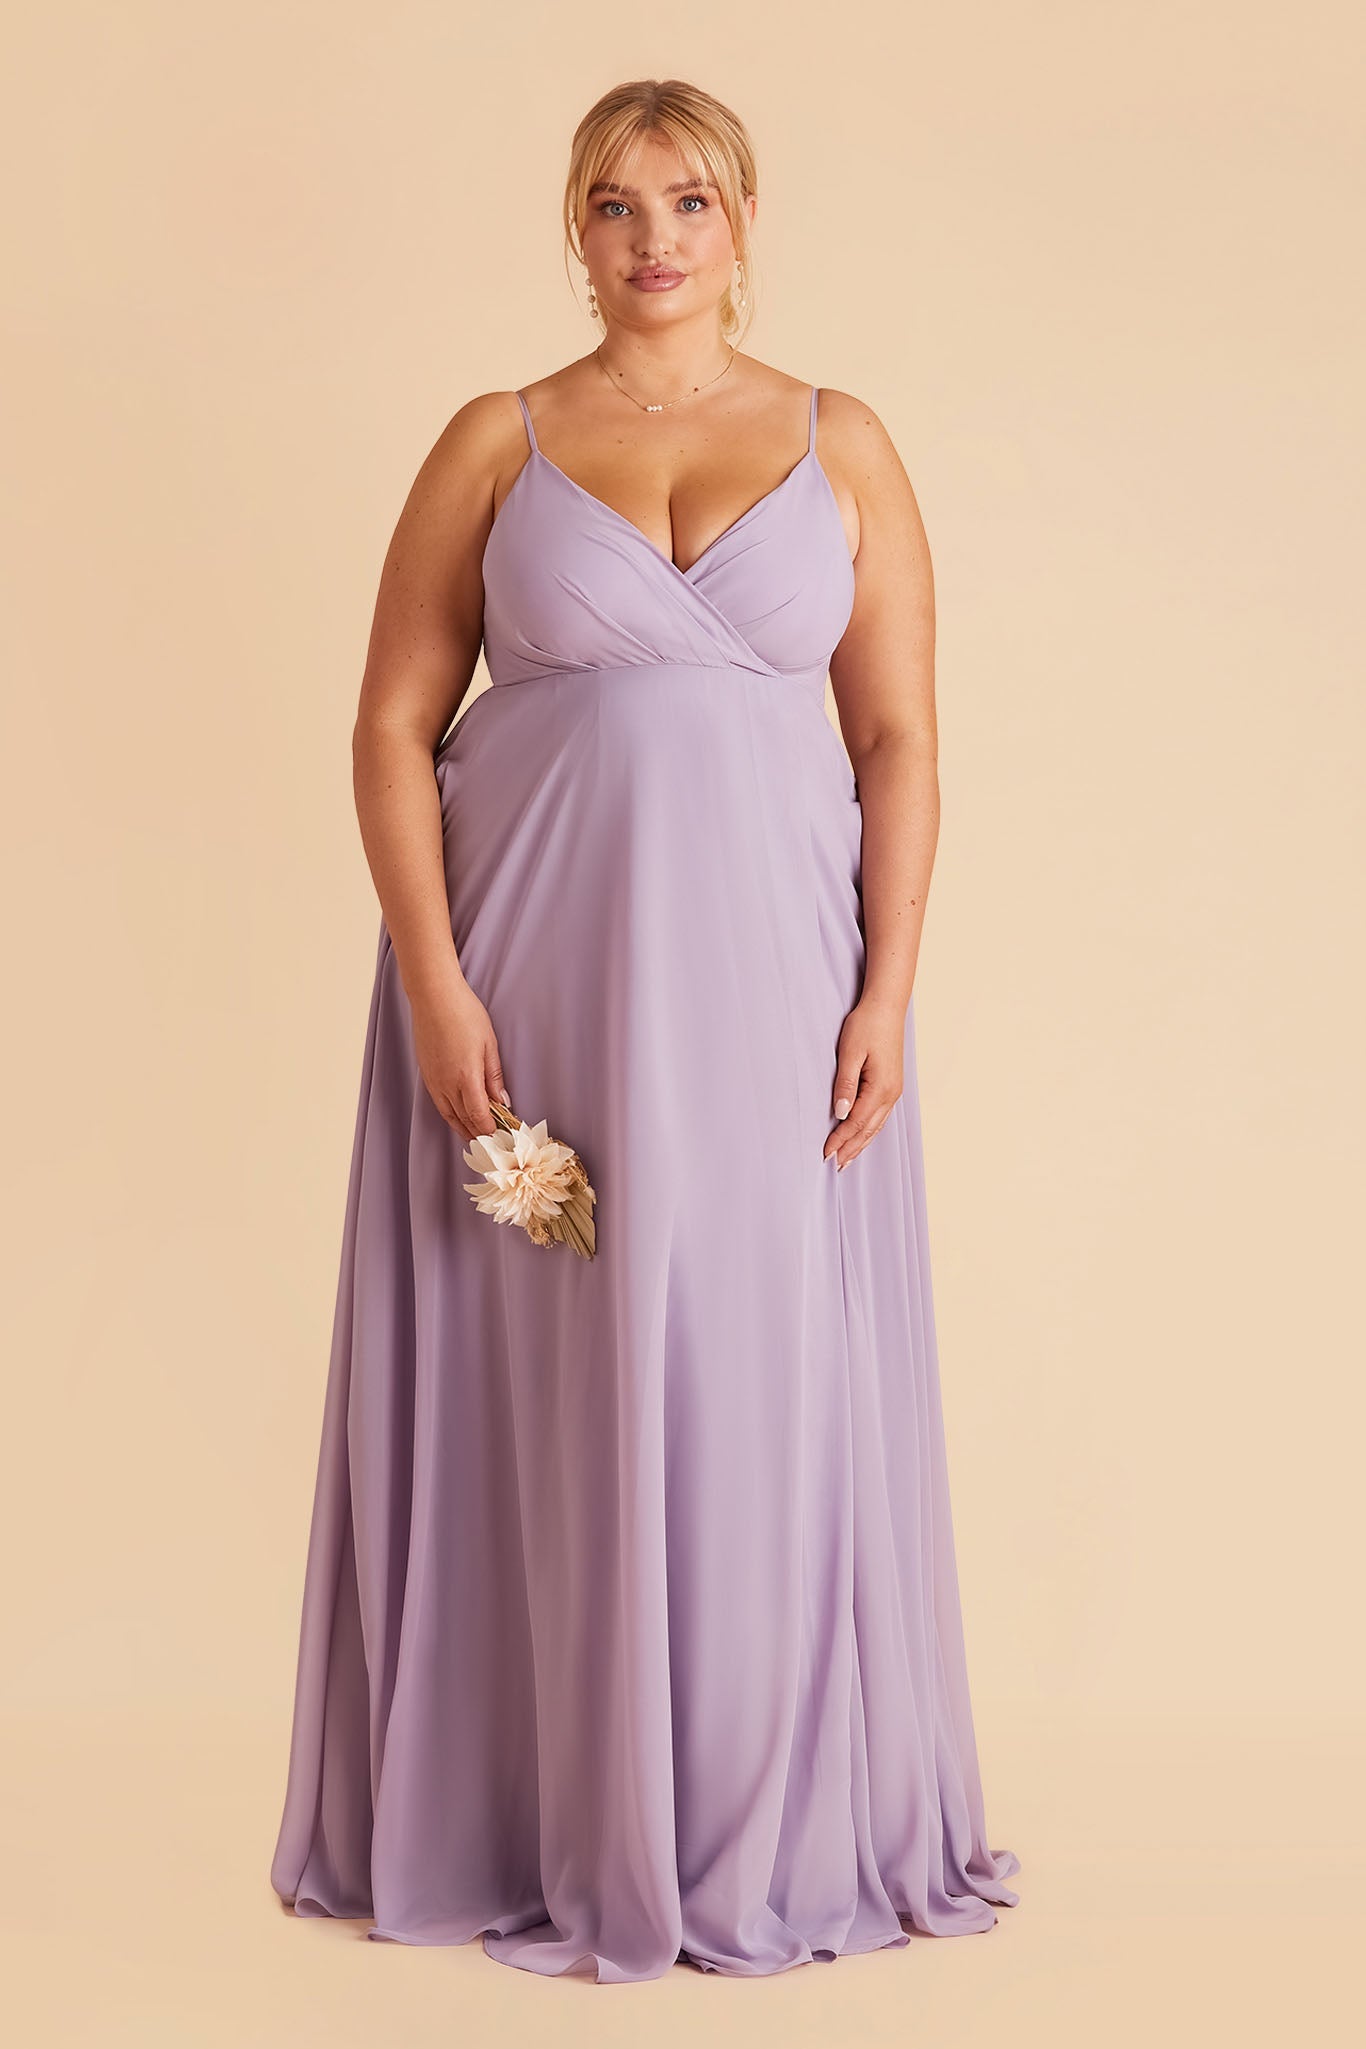 Kaia plus size bridesmaids dress in lavender chiffon by Birdy Grey, front view